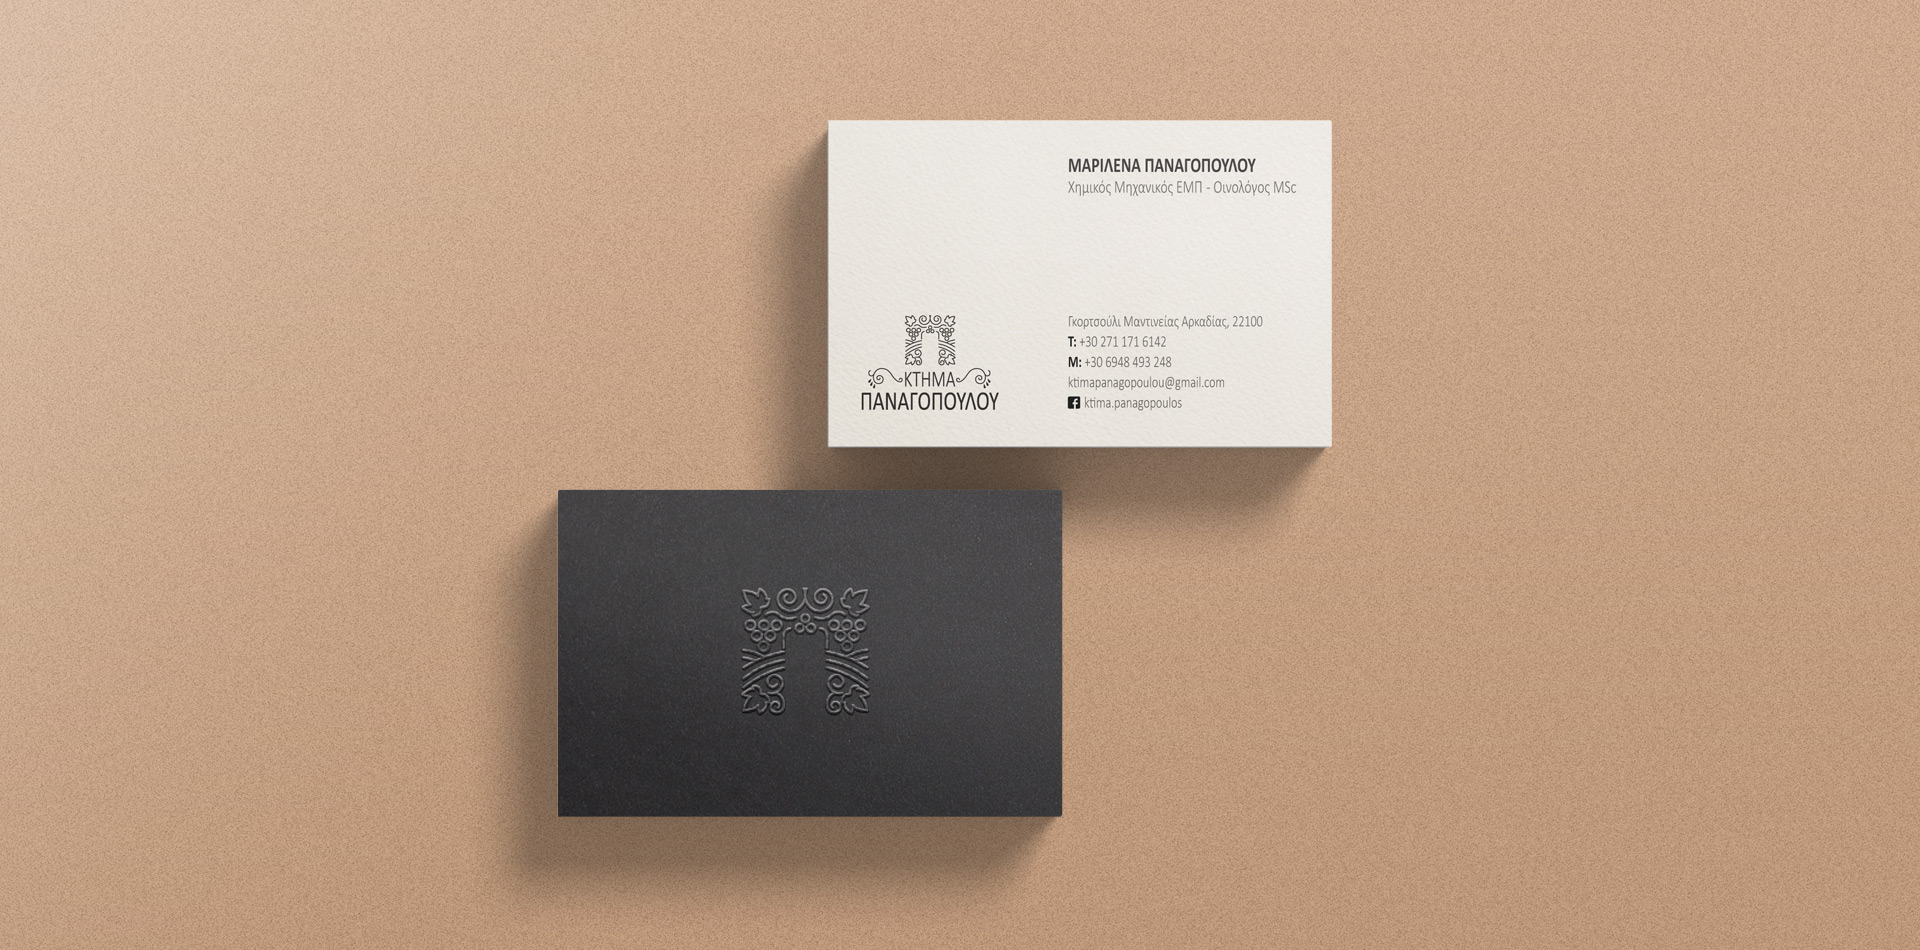 business cards ktima panagopoulos